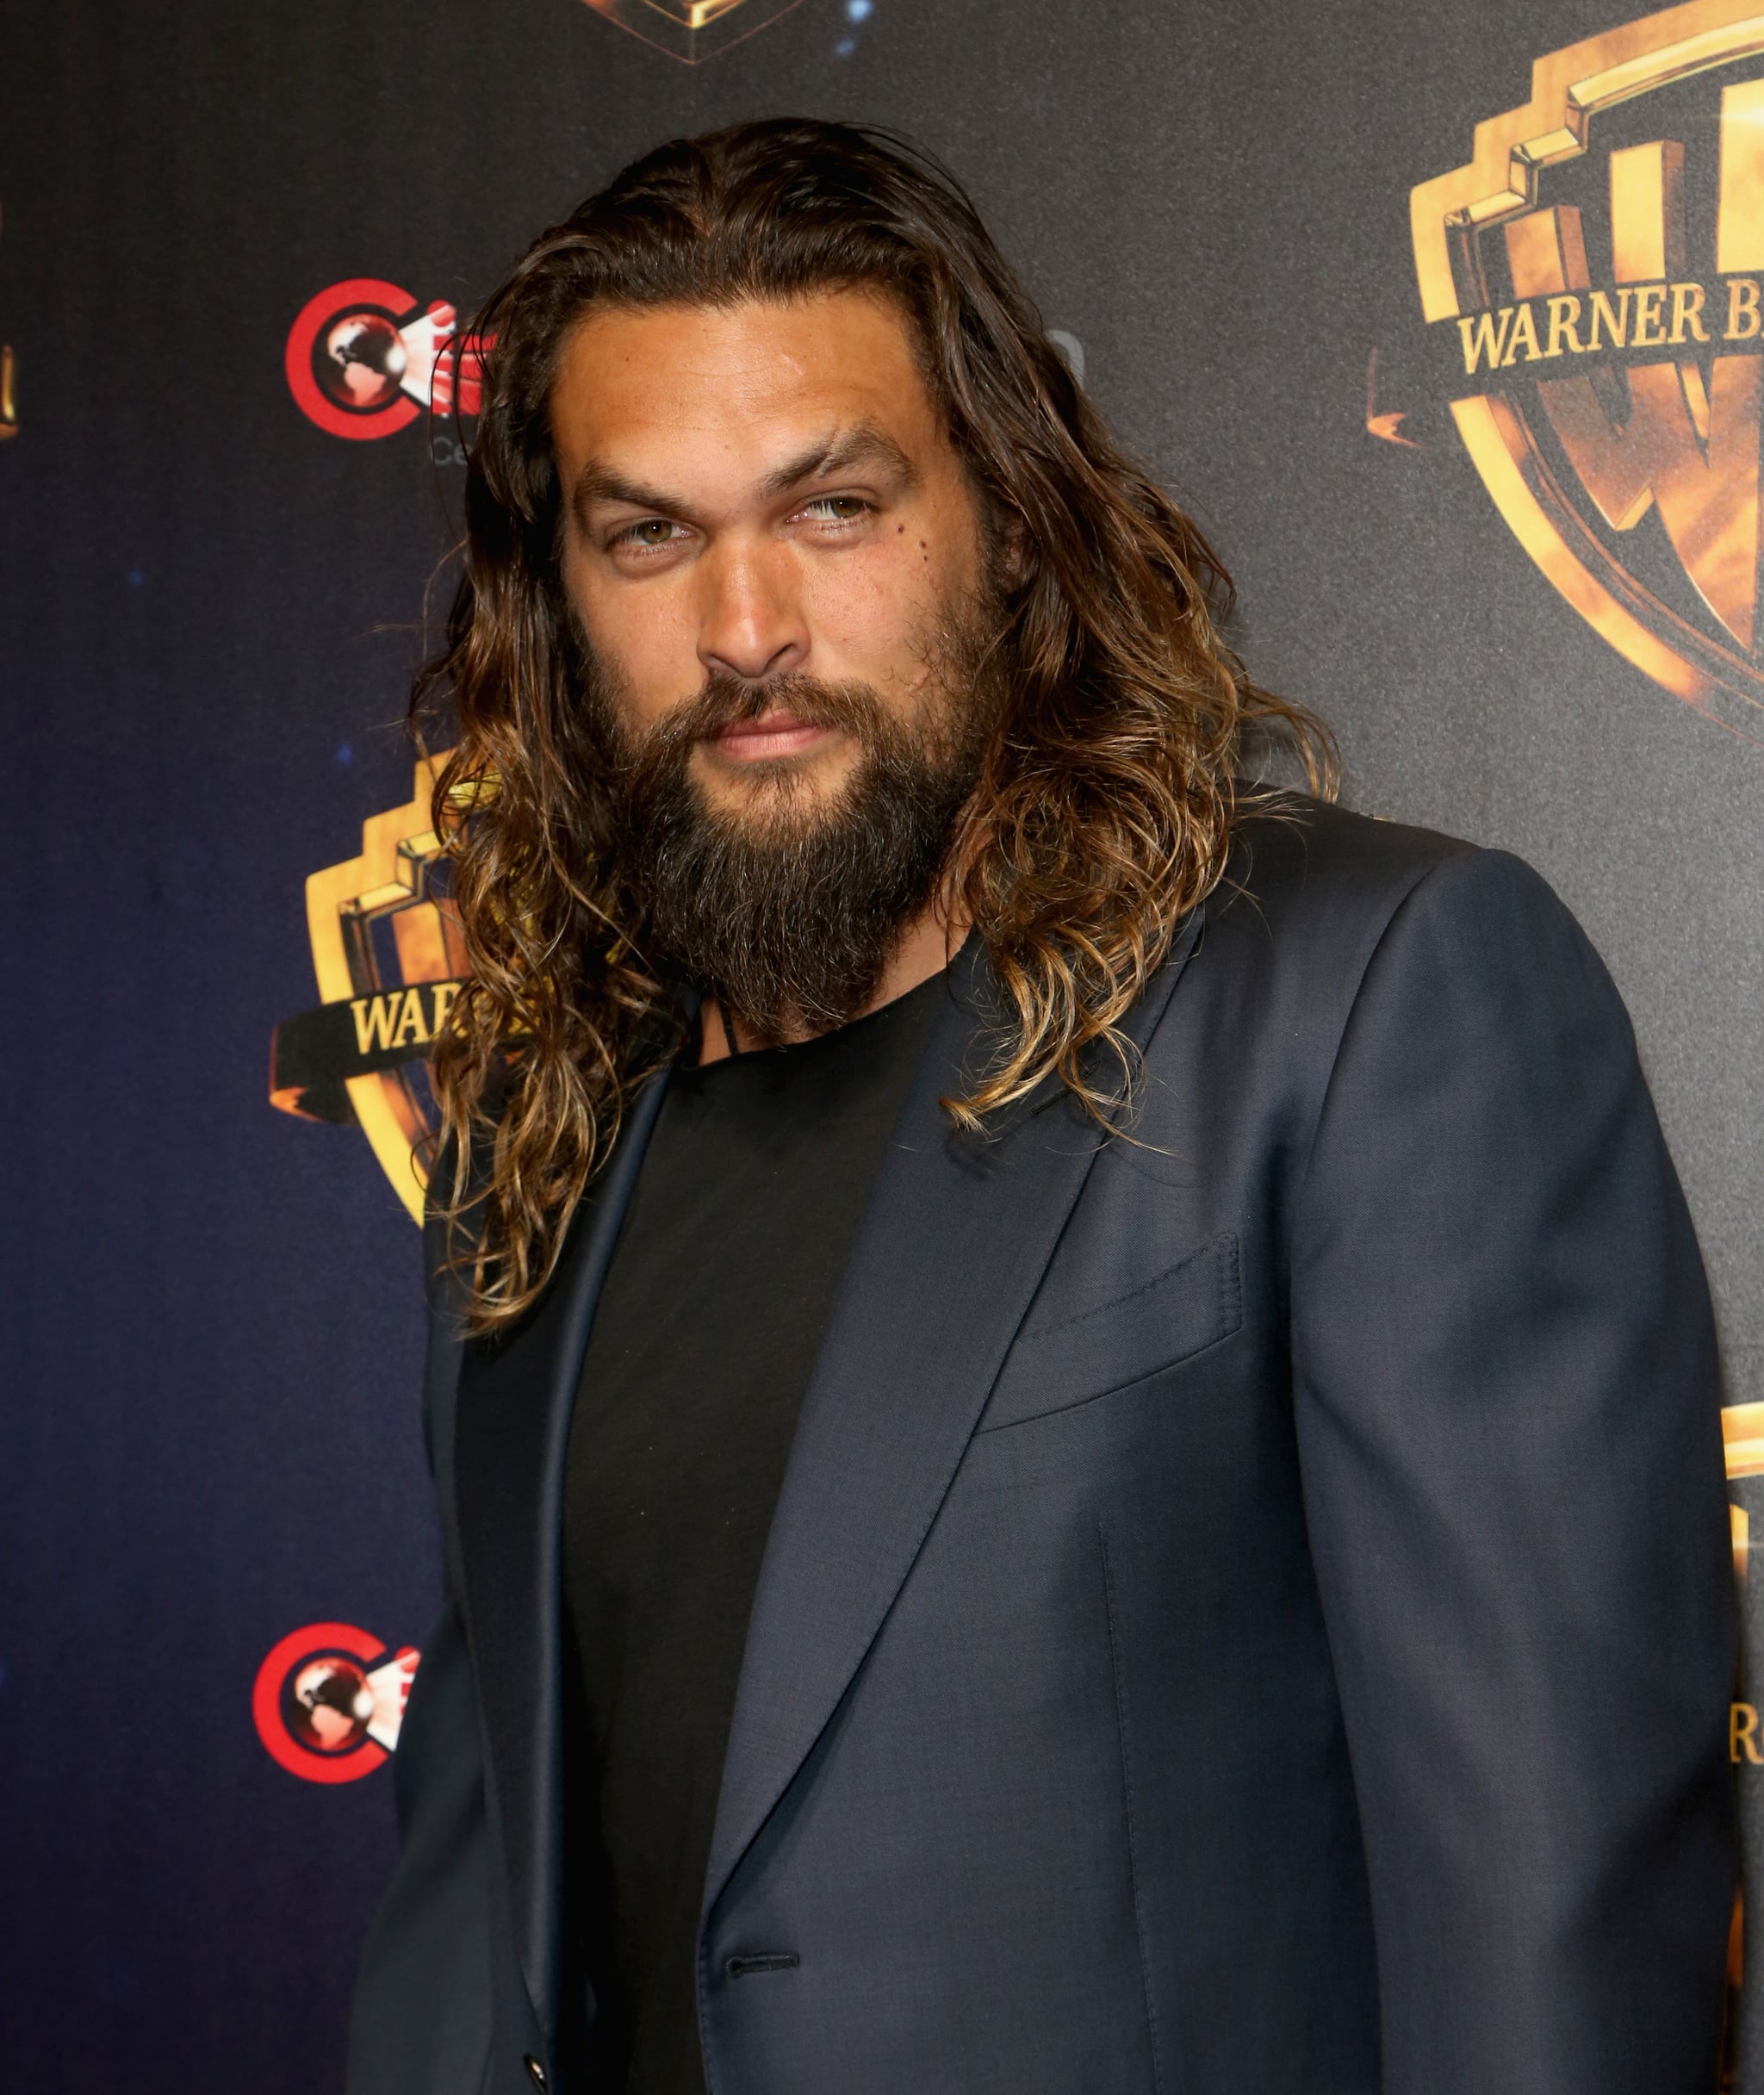 LAS VEGAS, NV - APRIL 24:  Actor Jason Momoa attends CinemaCon 2018 Warner Bros. Pictures Invites You to The Big Picture, an Exclusive Presentation of our Upcoming Slate at The Colosseum at Caesars Palace during CinemaCon, the official convention of the National Association of Theatre Owners on April 24, 2018 in Las Vegas, Nevada.  (Photo by Gabe Ginsberg/Getty Images)